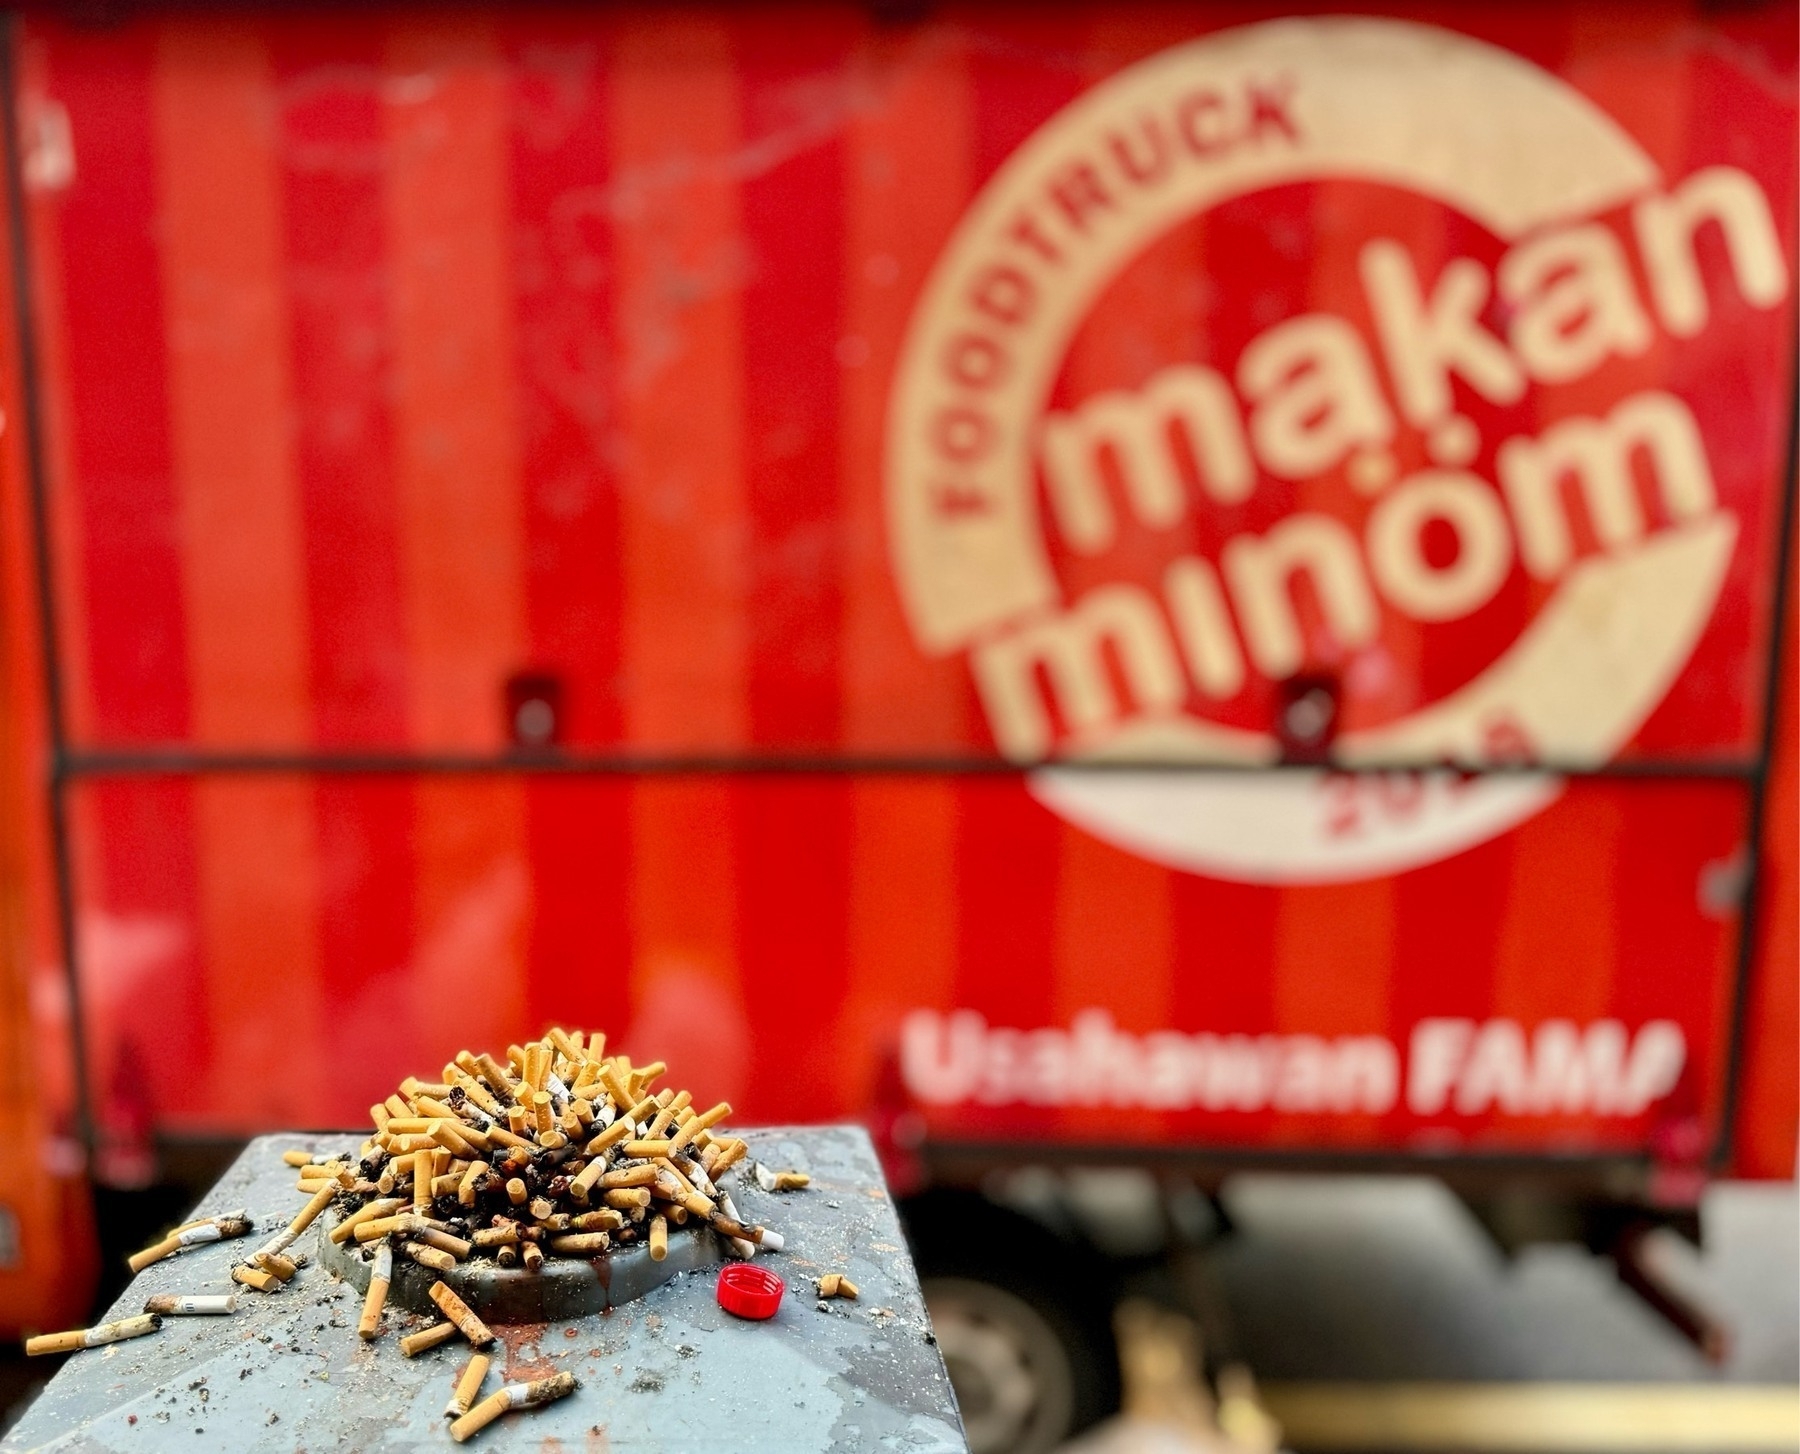 A huge pile of cigarette butts on a disposal stand, in front of the side of a food truck, in red with white writing